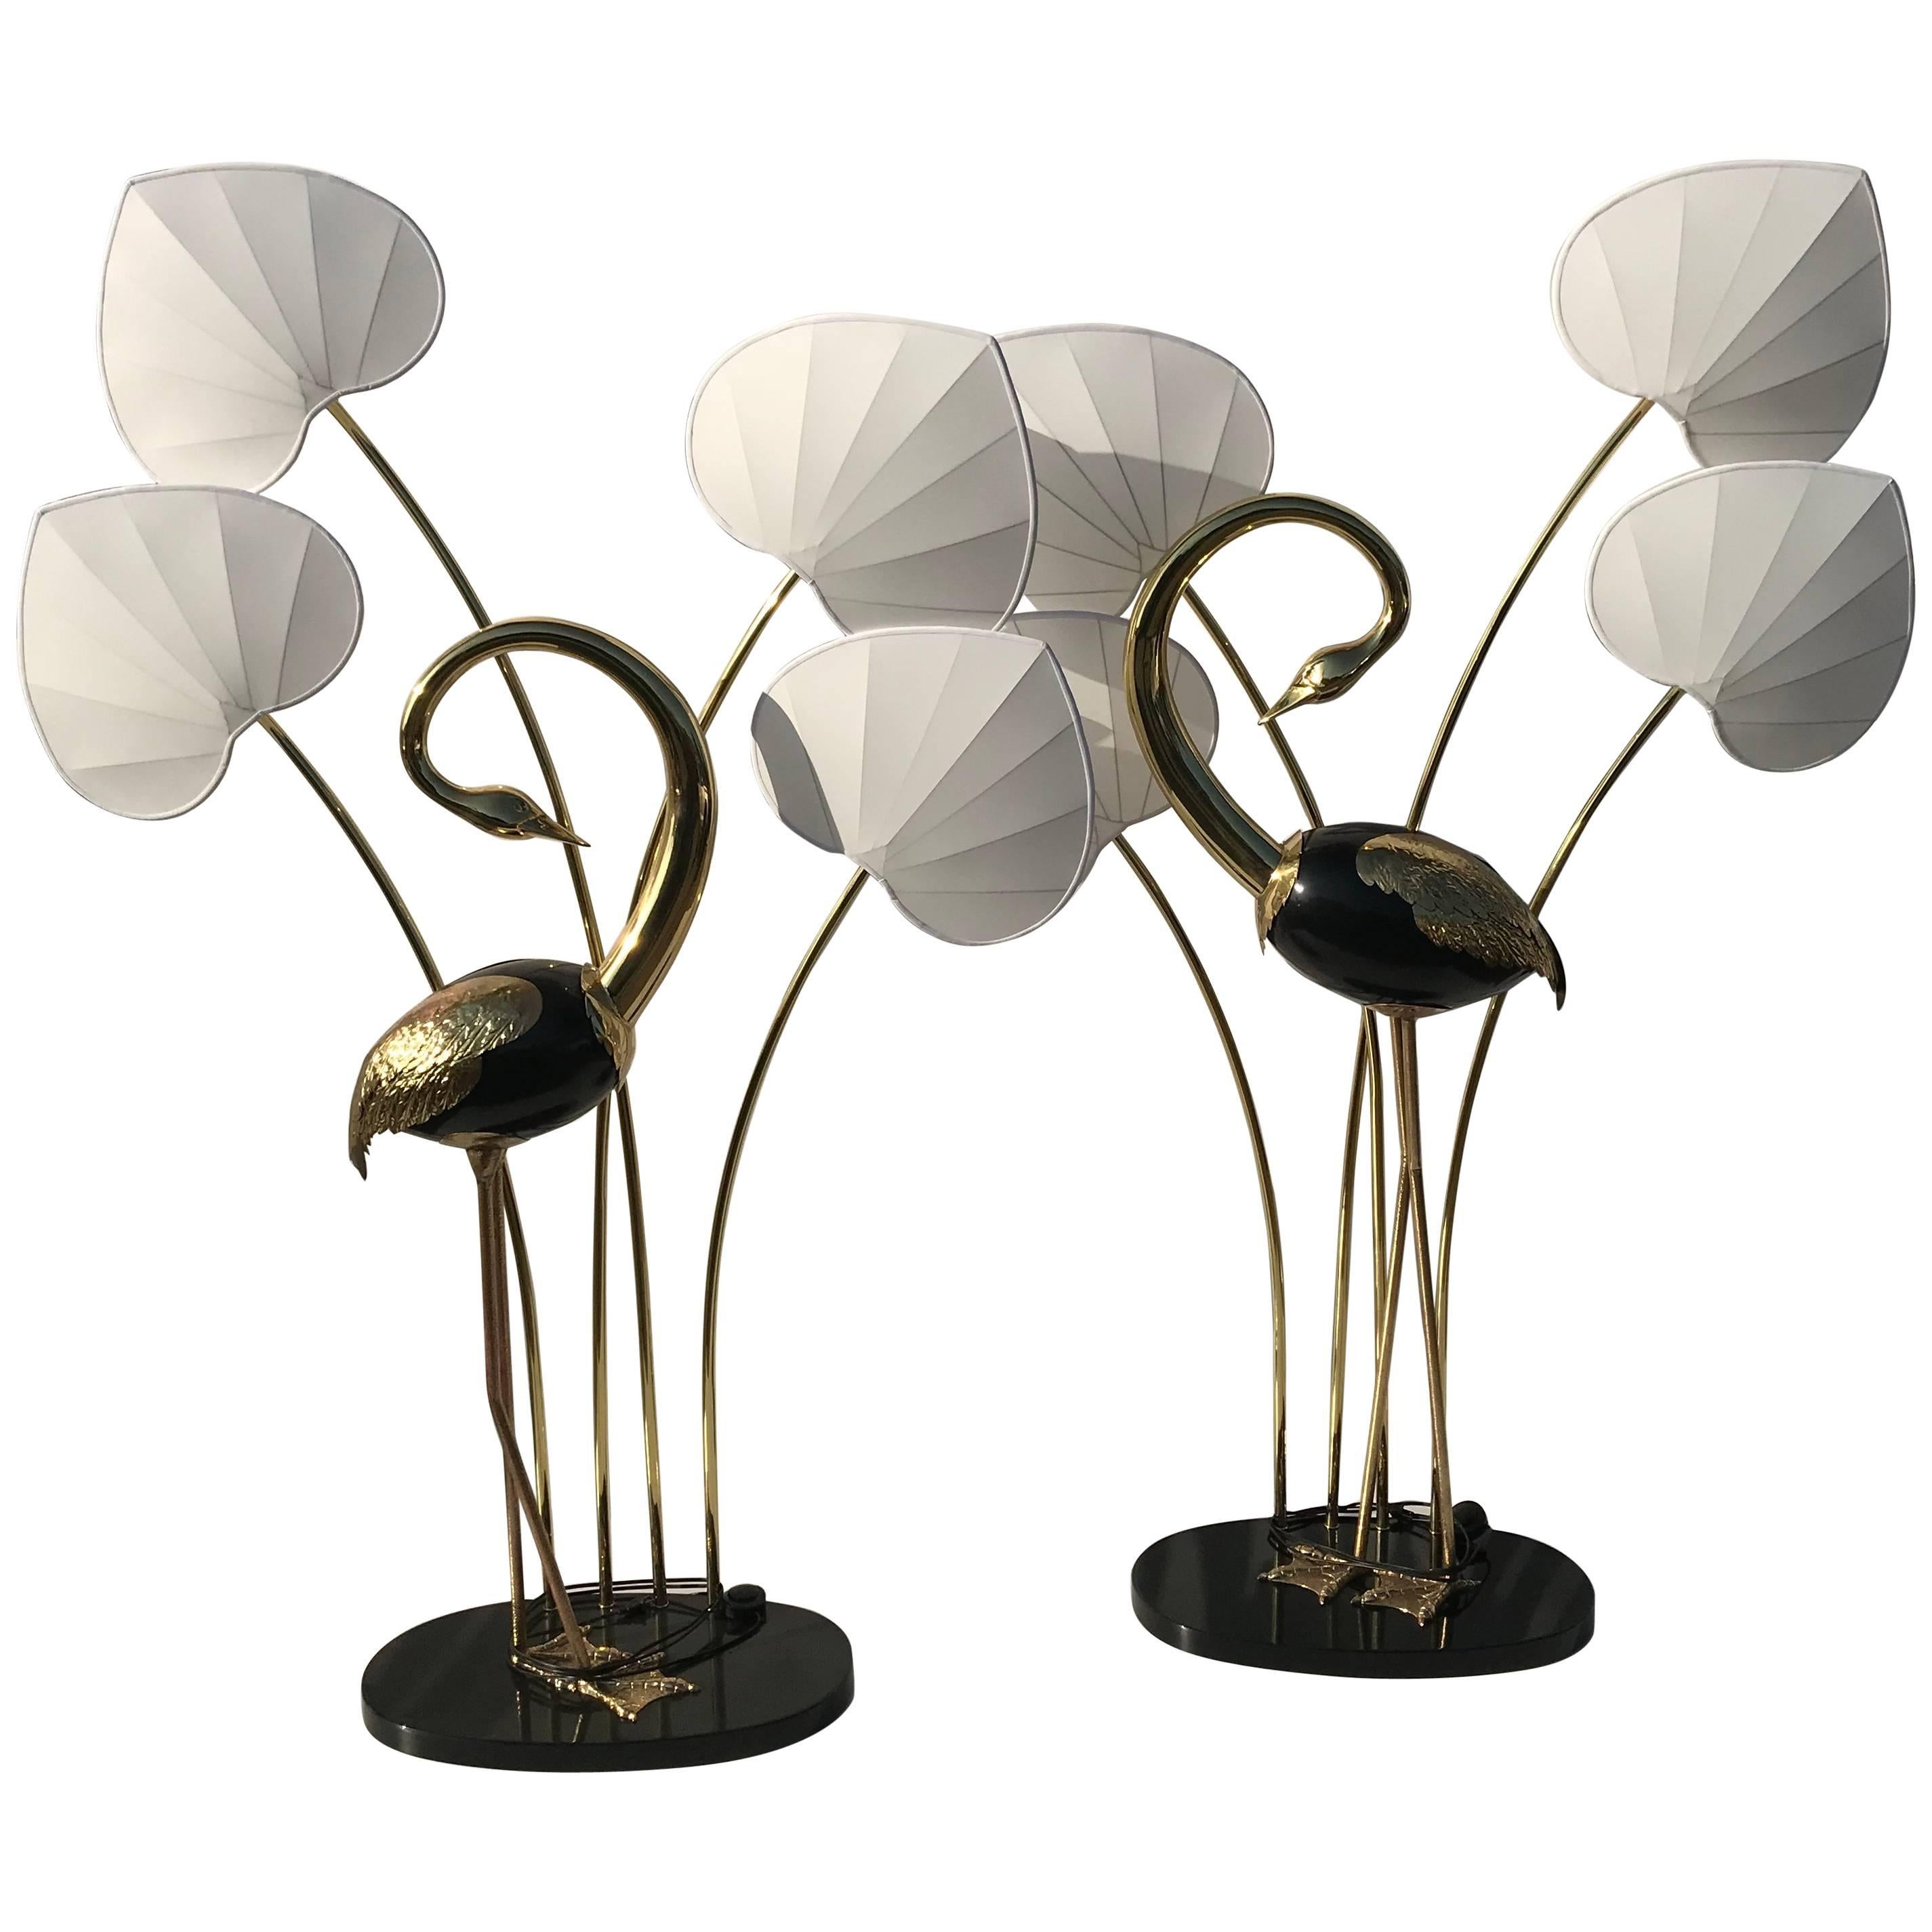 Monumental Pair of Brass Standing Egret Floor Lamps by Antonio Pavia For Sale